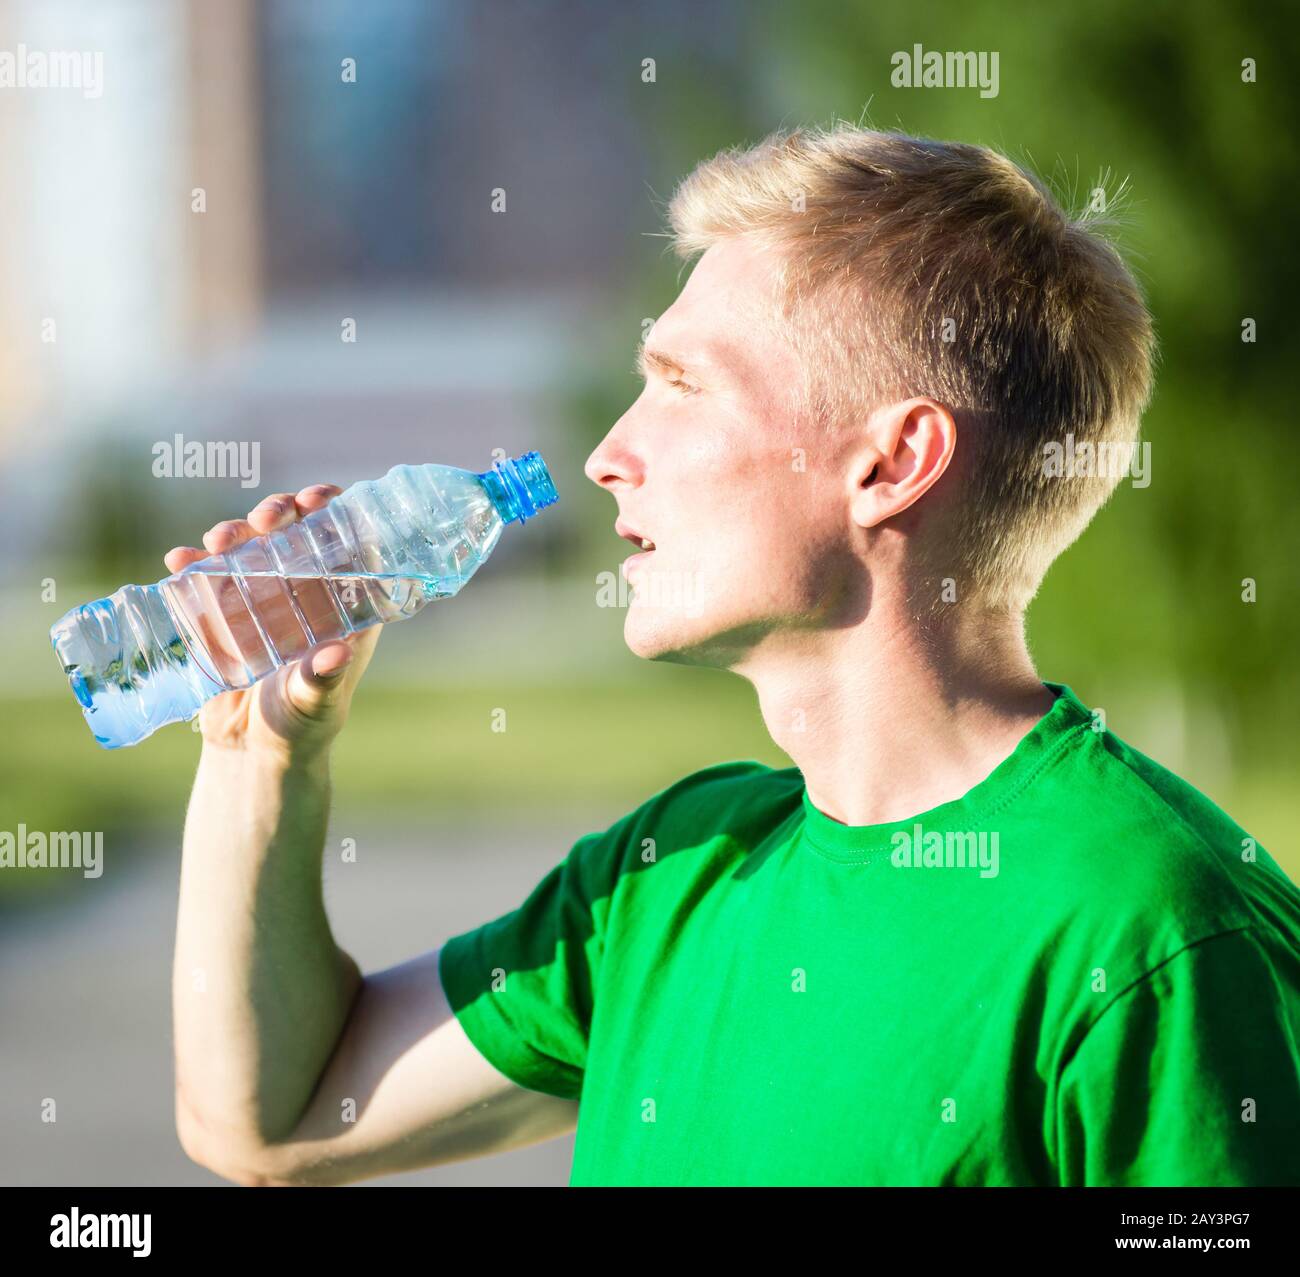 young man or teenager drinking water from bottle Stock Photo